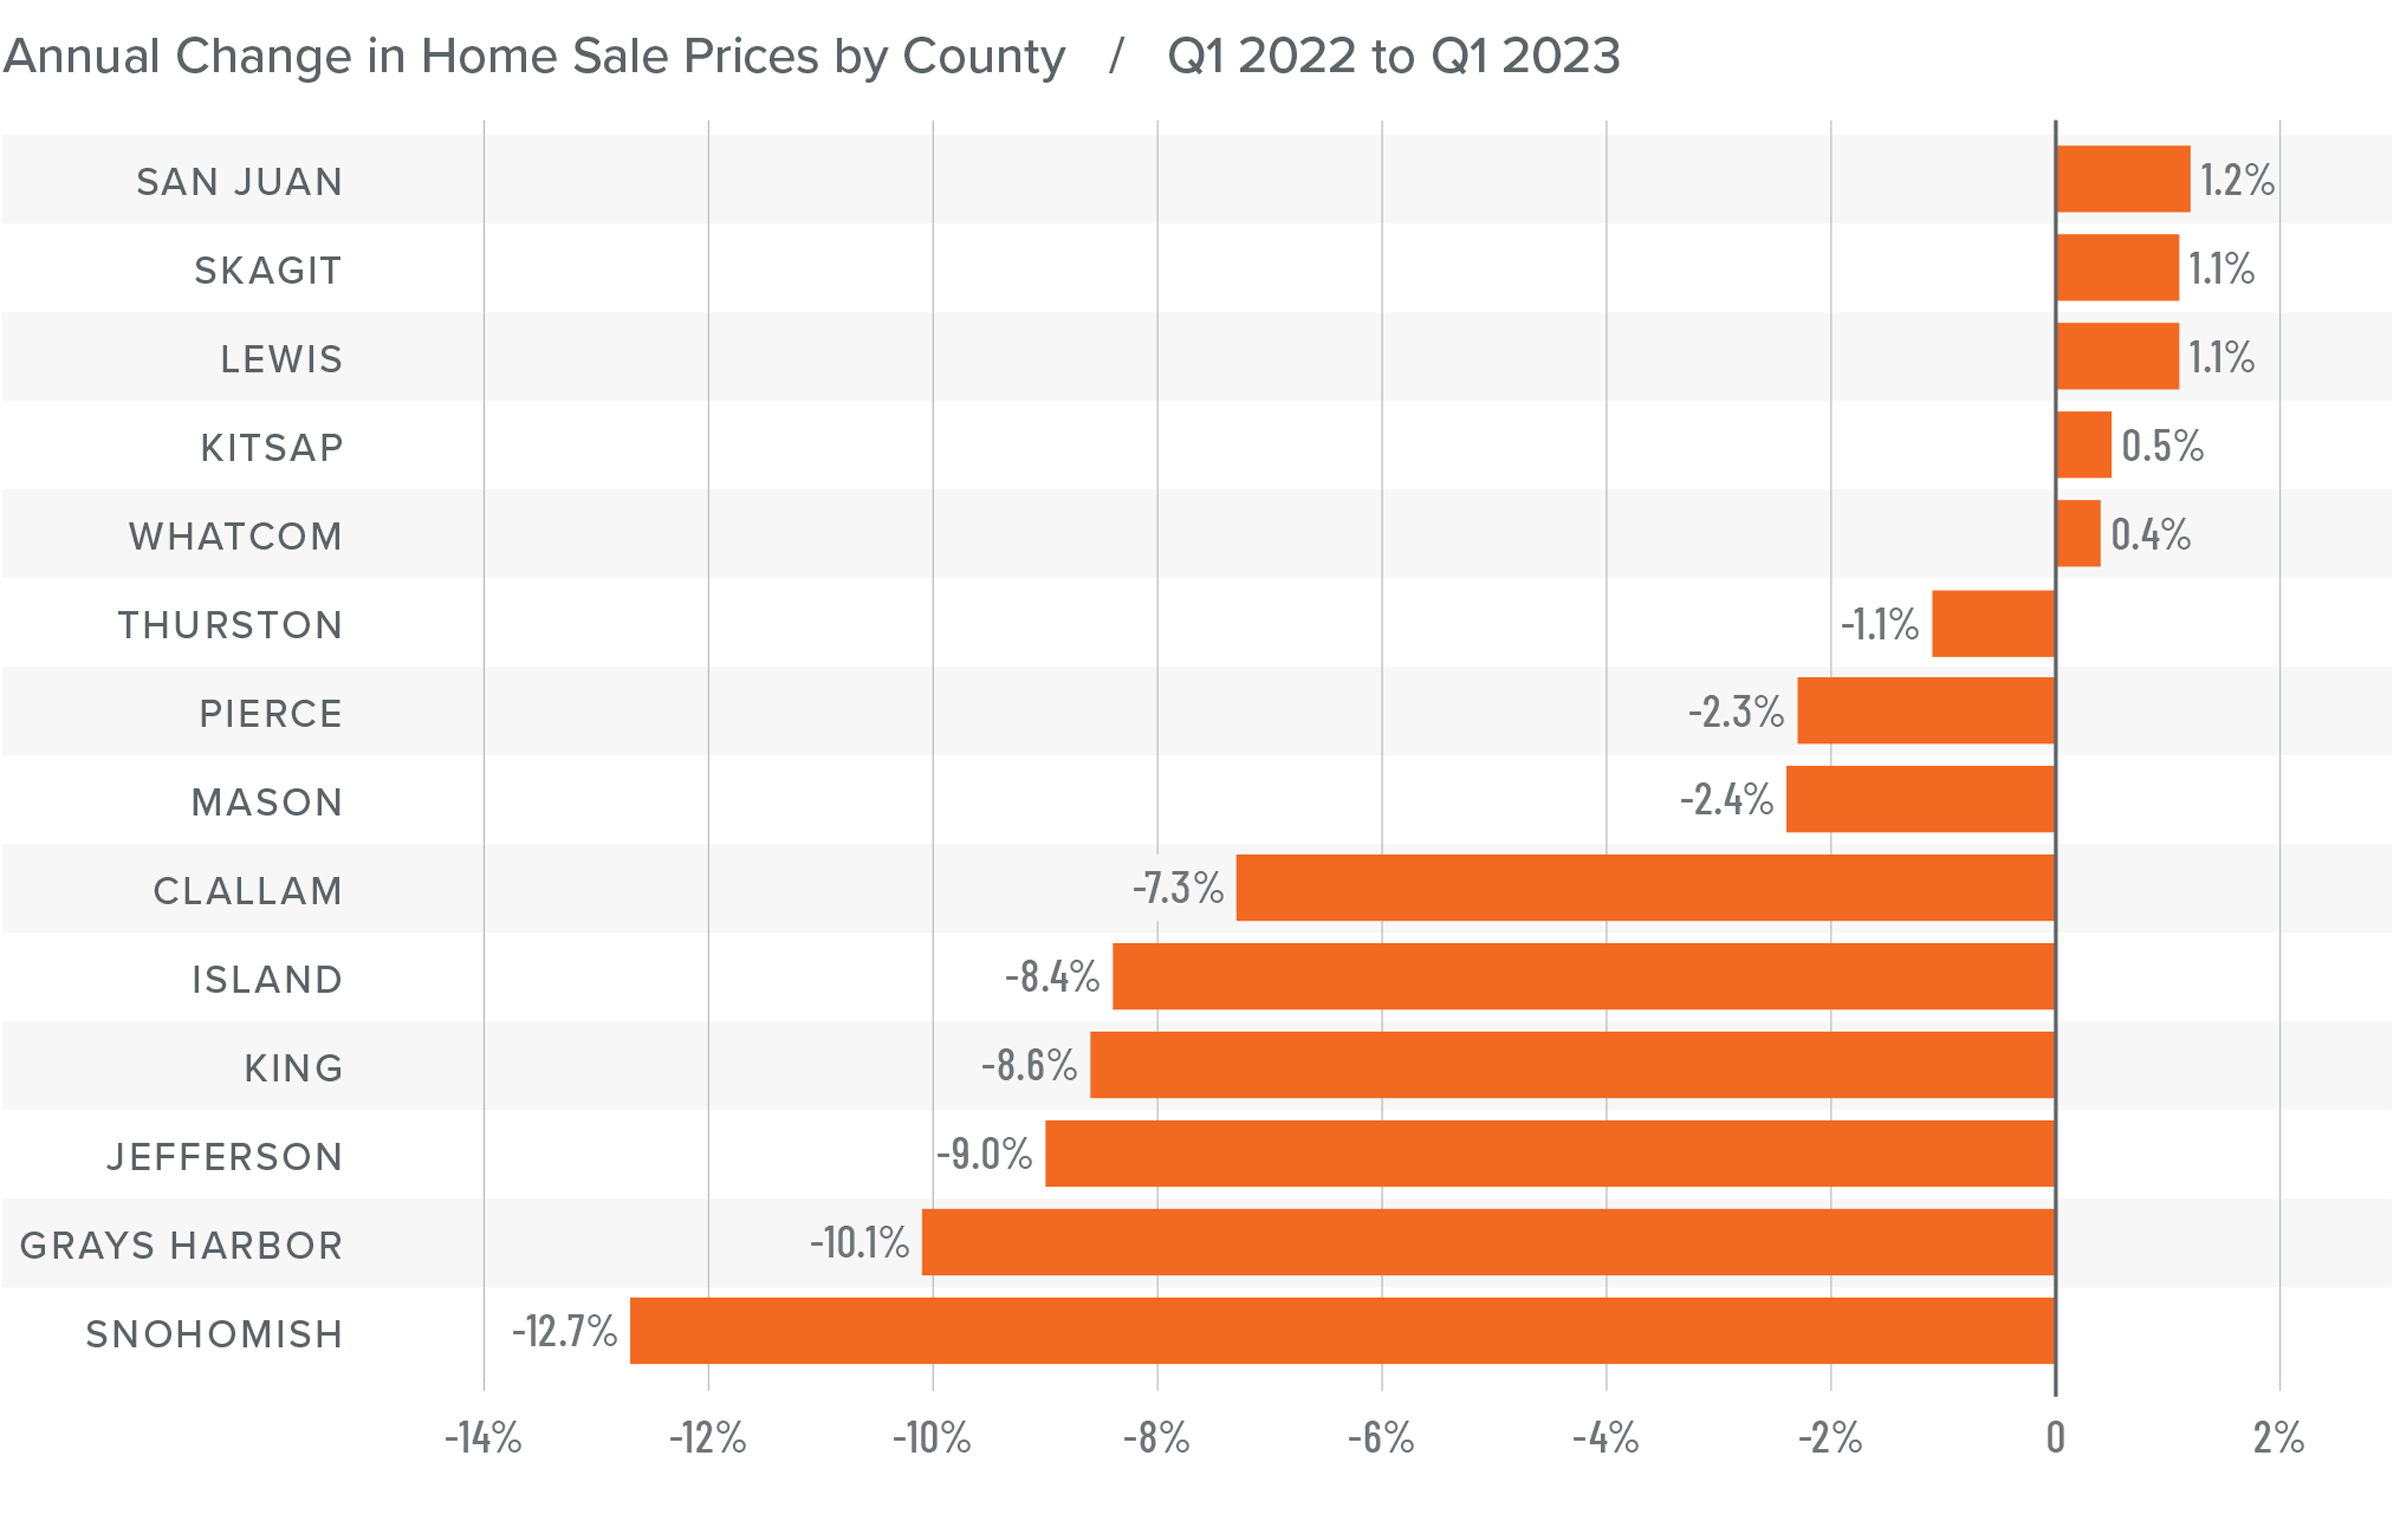 A bar graph showing the annual change in home sale prices for various counties in Western Washington from Q1 2022 to Q1 2023. San Juan County tops the list at 1.2%, followed by Skagit and Lewis at 1.1%, Kitsap at 0.5%, Whatcom at 0.4%, Thurston at 1.1%, Pierce at -2.3%, Mason at -2.4%, Clallam at -7.3%, Island at -8.4%, King at -8.6%, Jefferson at -9%, Grays Harbor at -10.1%, and finally Snohomish at -12.7%.